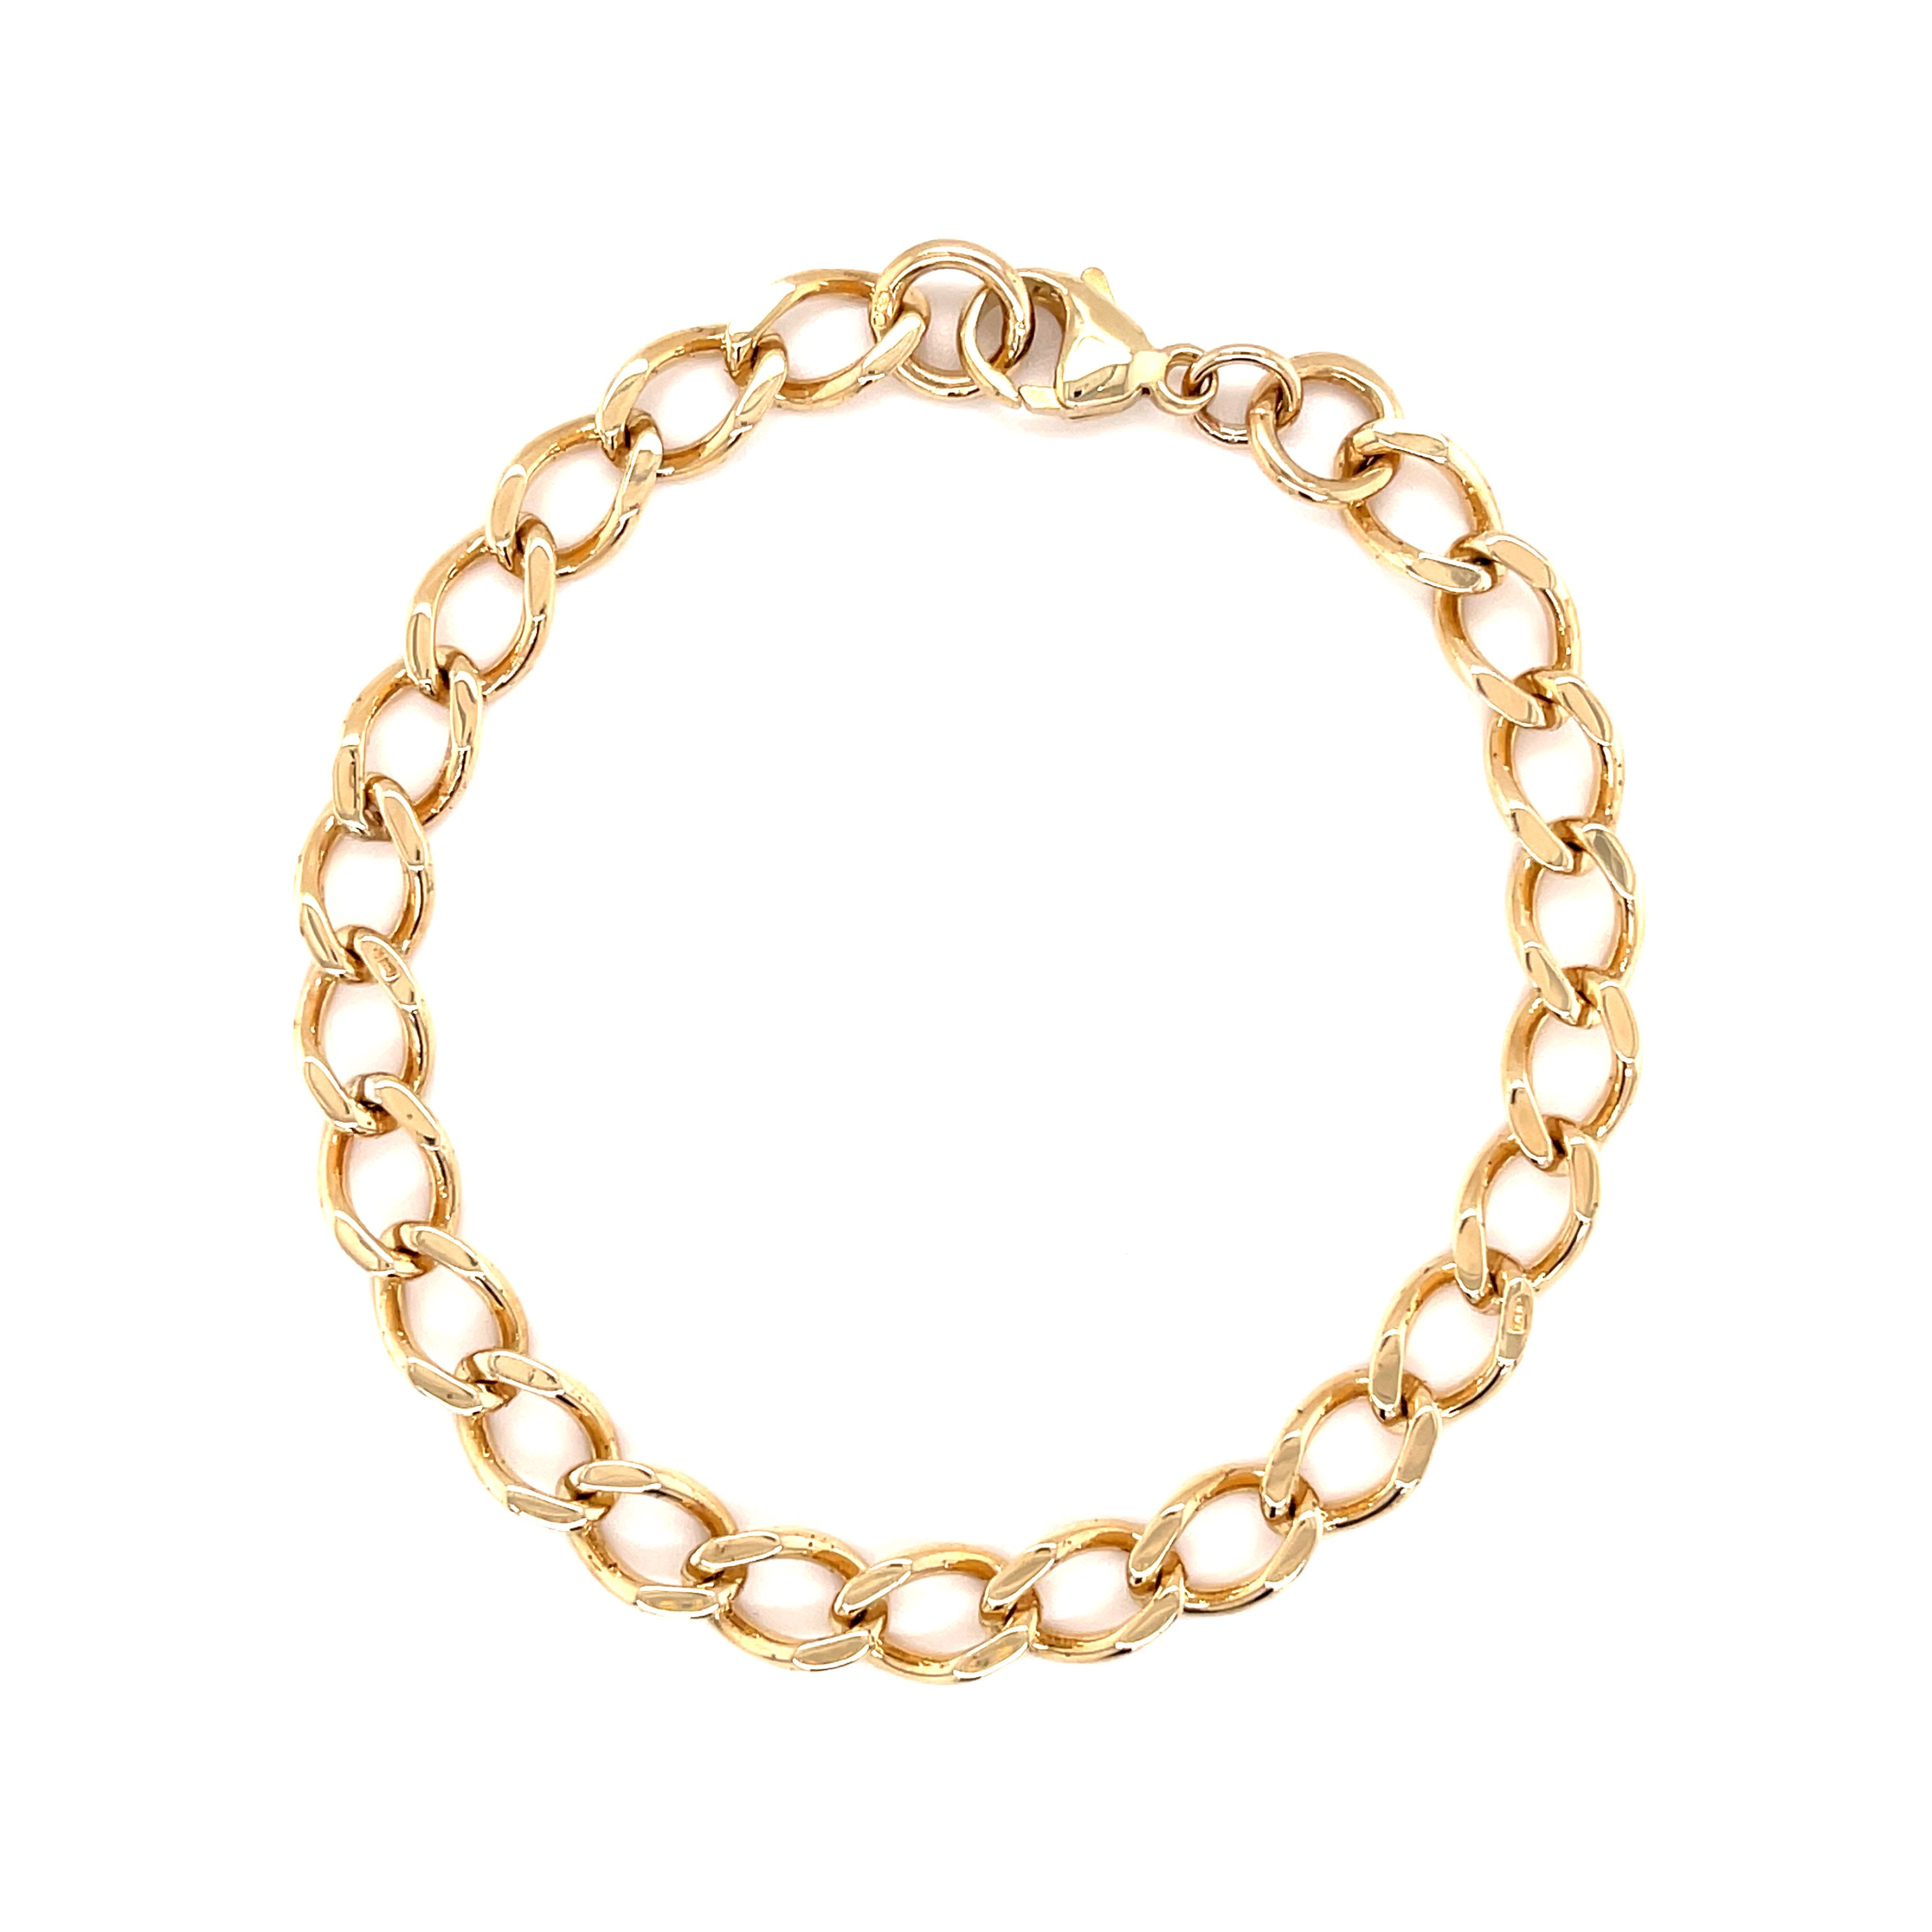 9ct Yellow Gold 7.5" Open Curb Link Bracelet - 12.40g SOLD